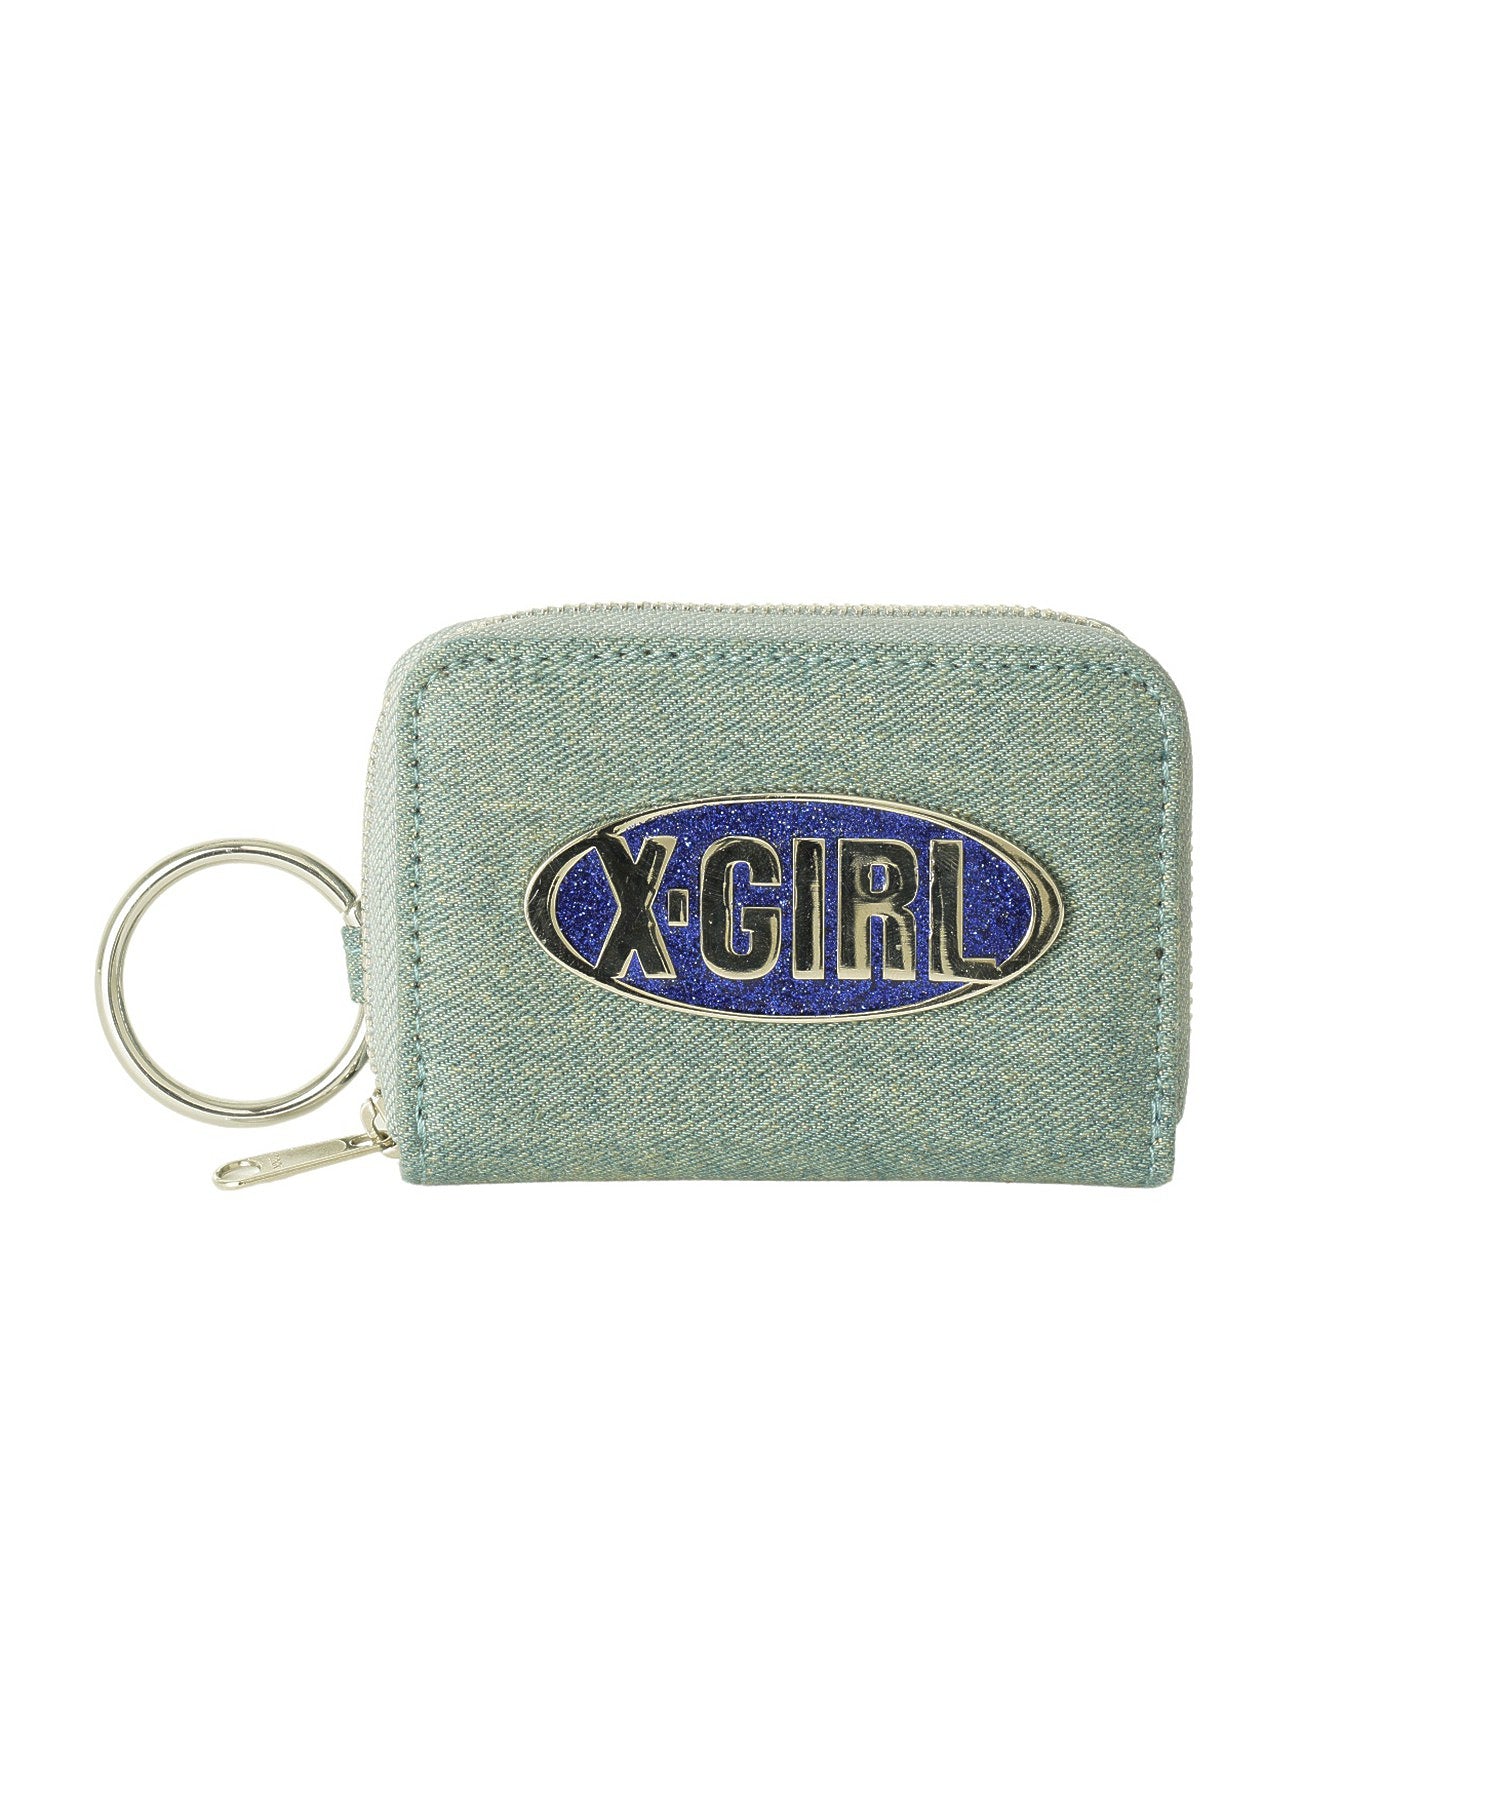 GLITTER OVAL LOGO COIN AND CARD CASE